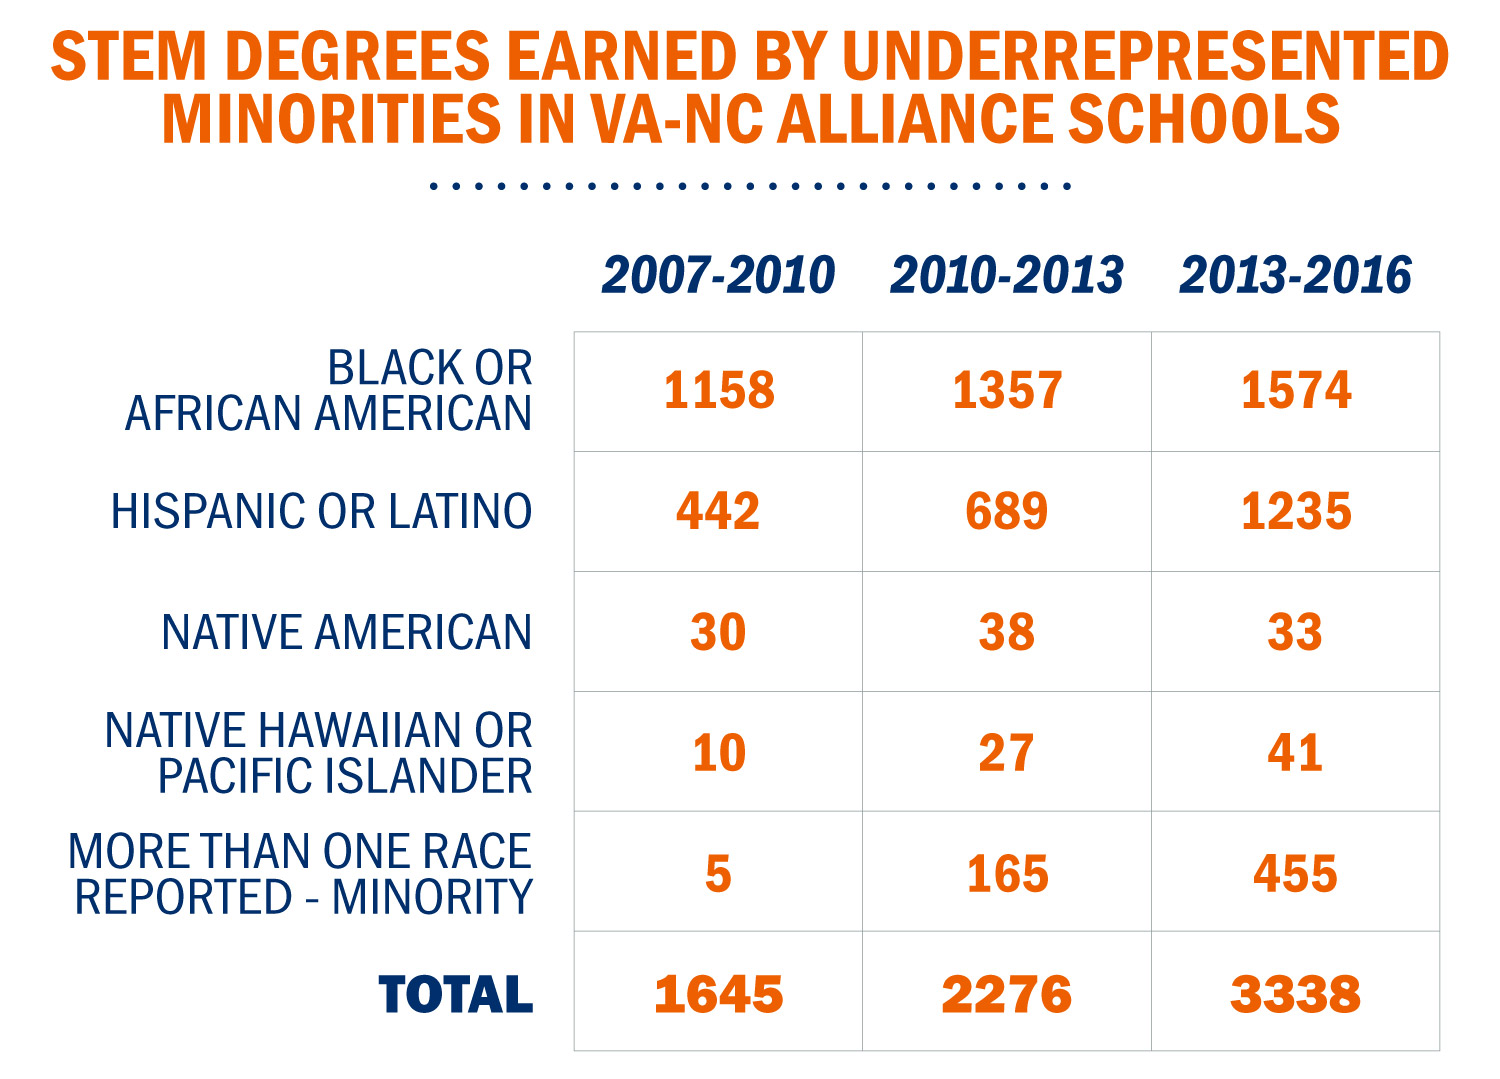 The table shows that the number of underrepresented students who earned bachelor’s degrees in STEM disciplines at VA-NC Alliance schools more than doubled as of 2016. The total over the nine-year period comes to 7,259.